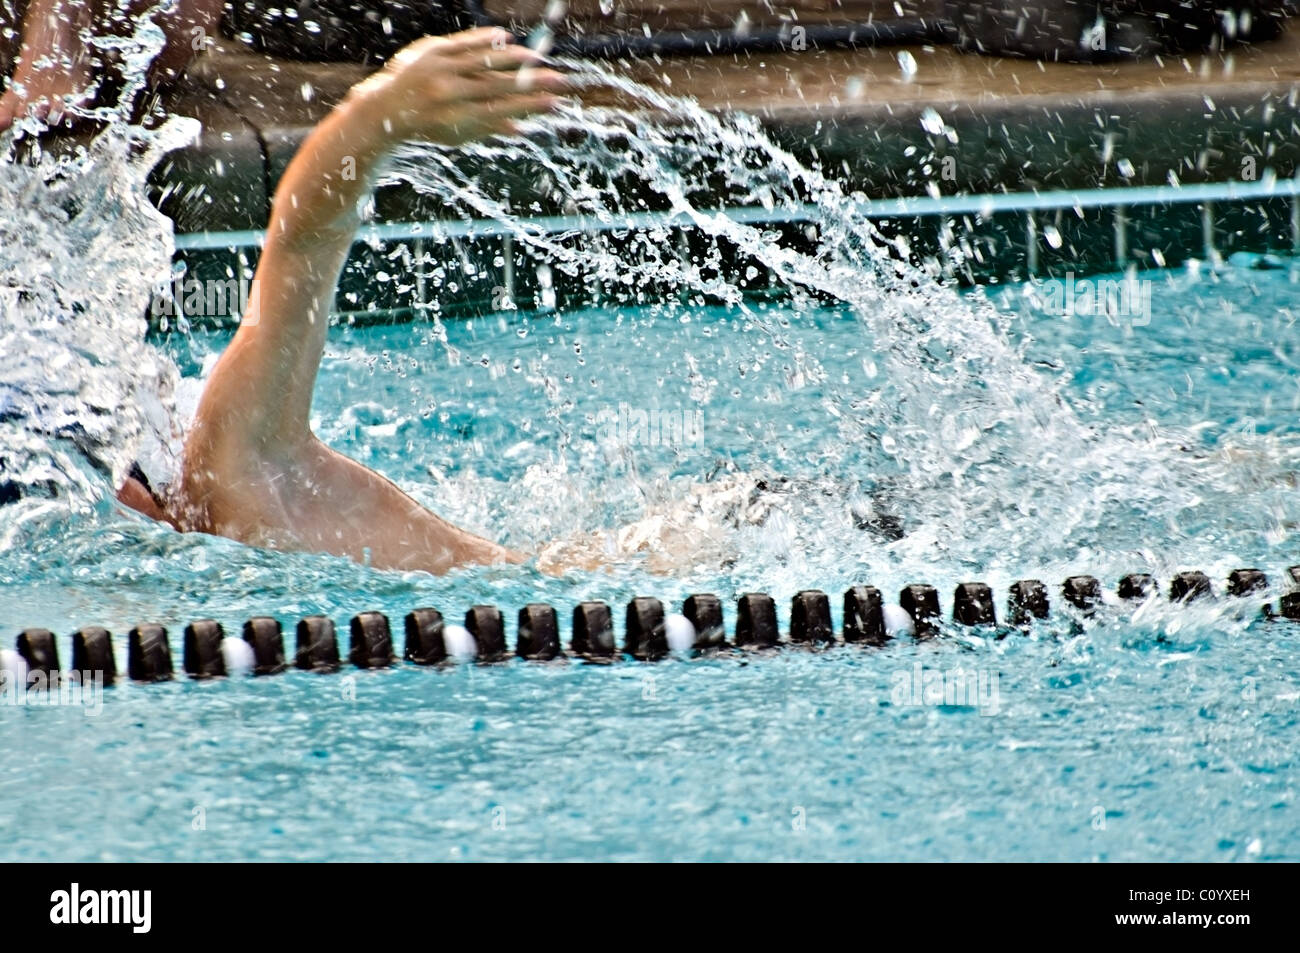 Swimmer's arm during a freestyle competition. Stock Photo